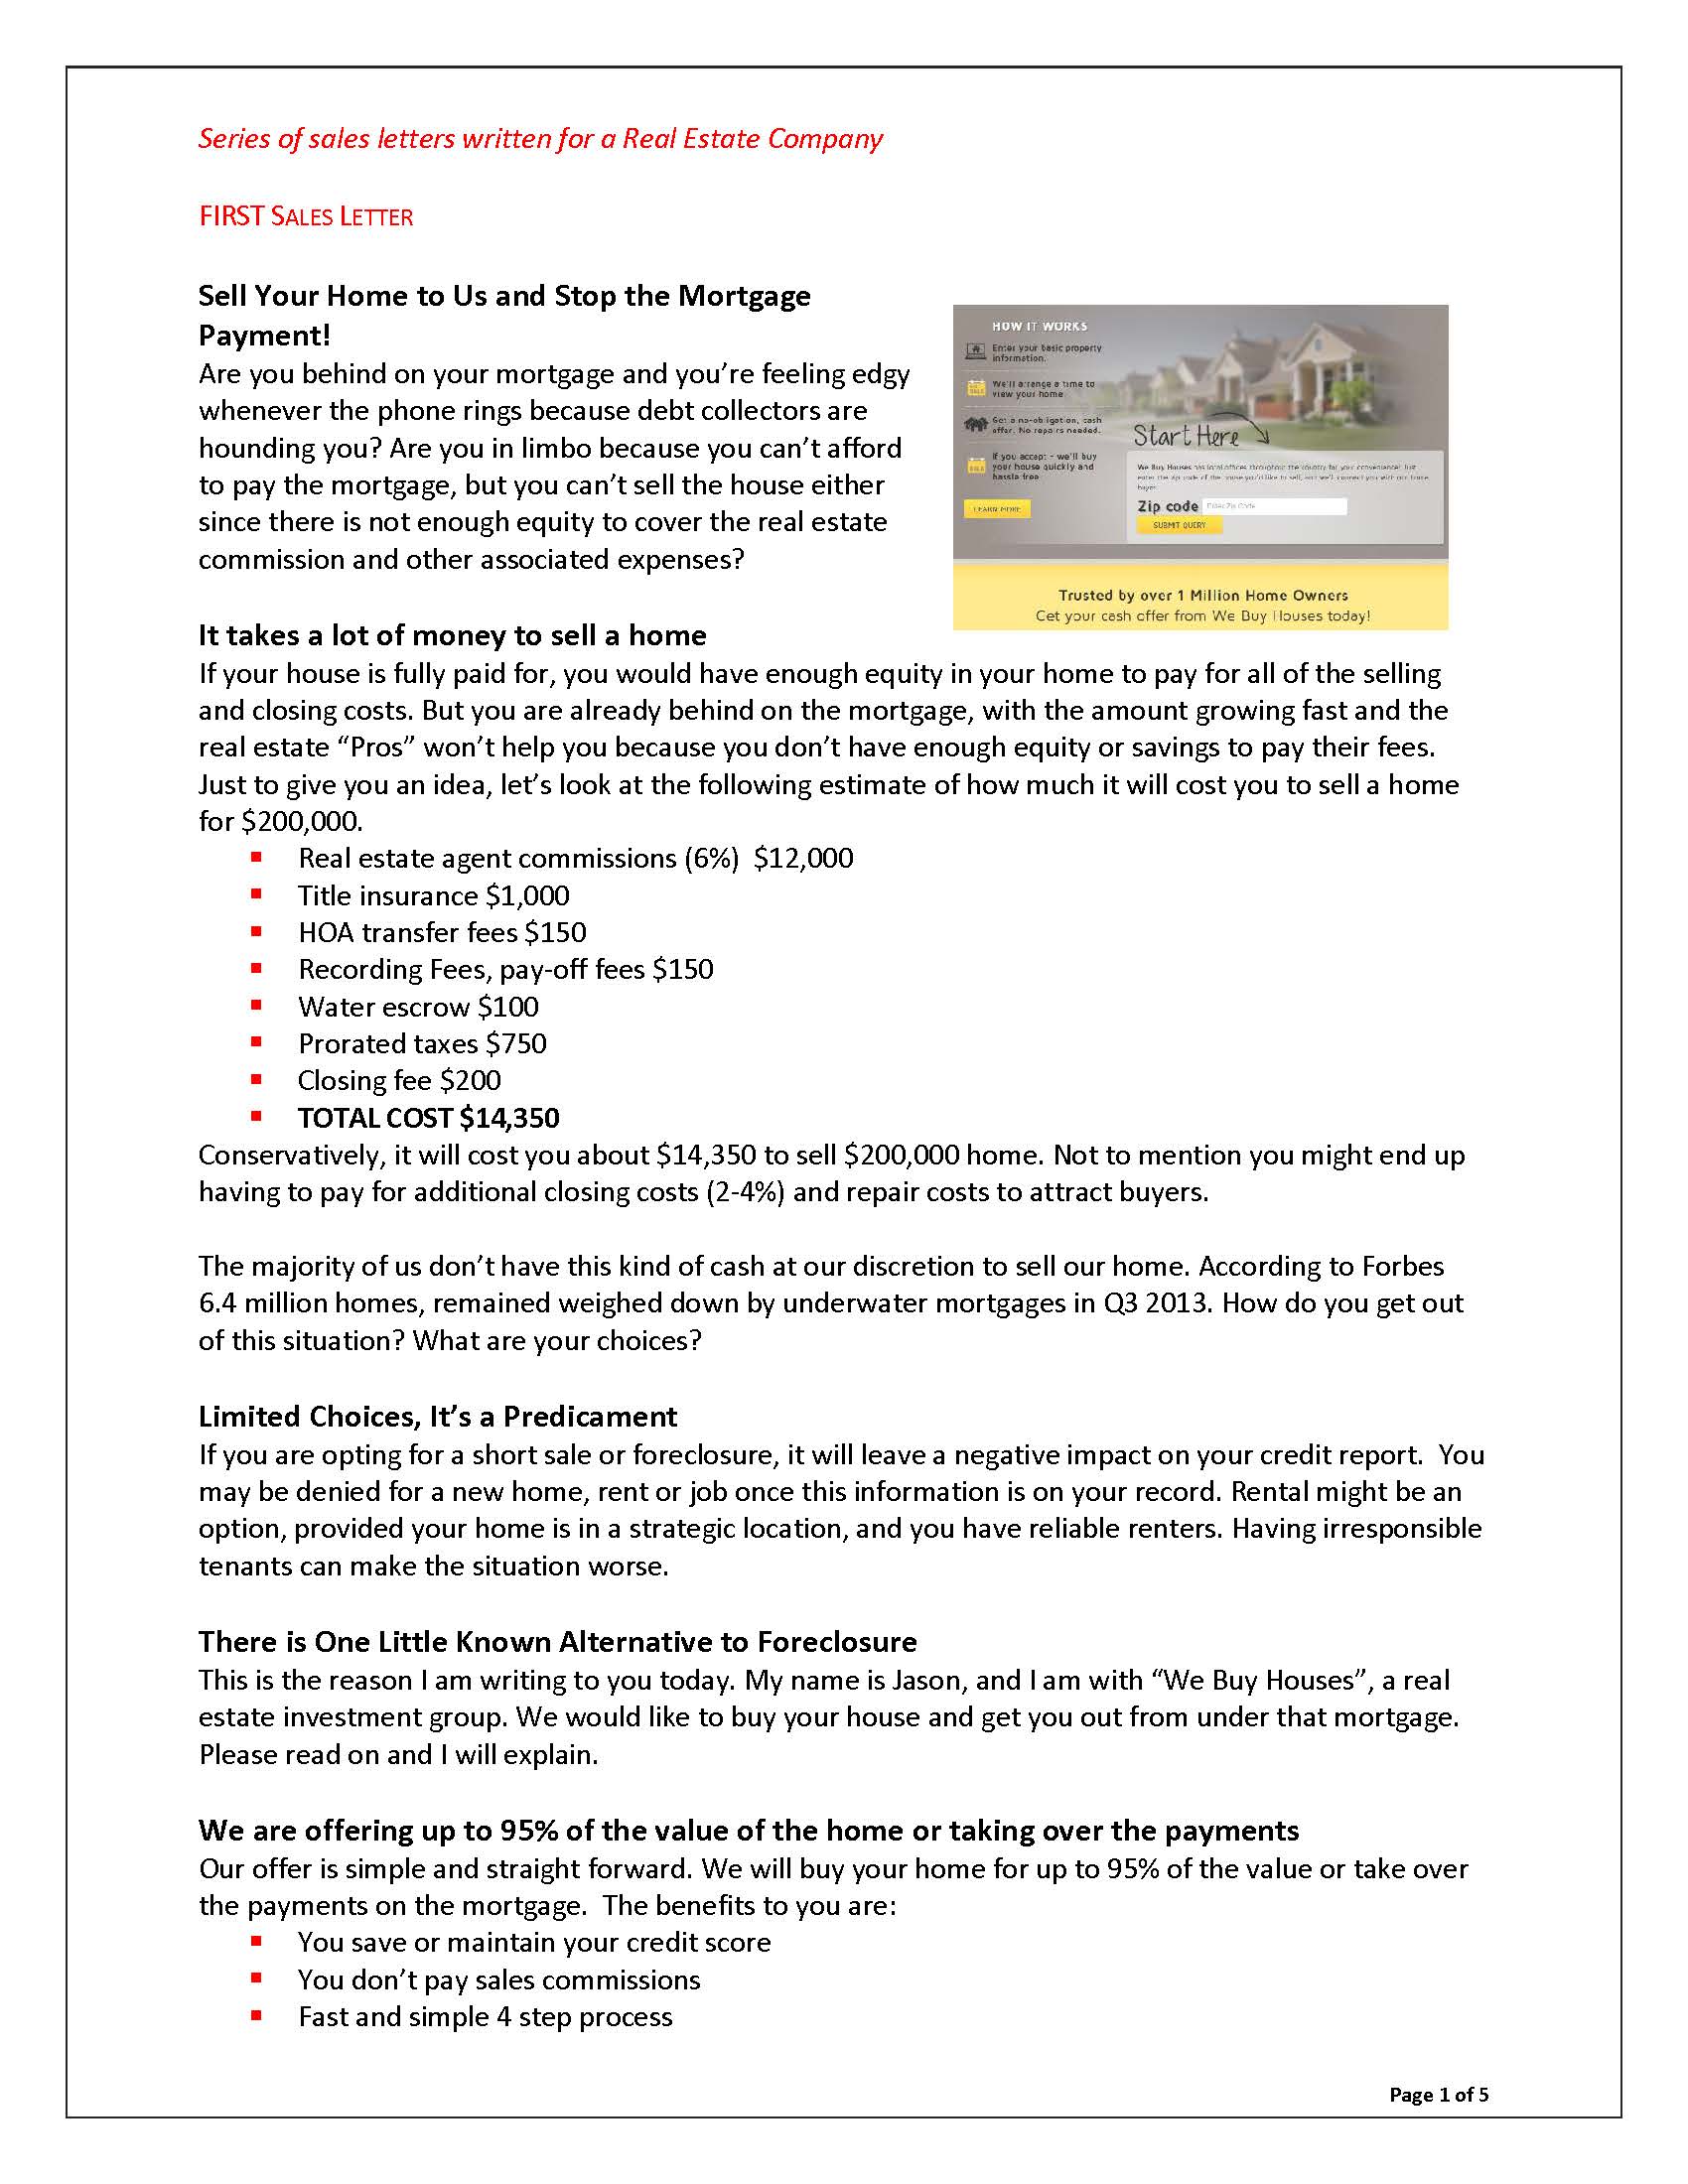 Sales Letter Series - Real Estate Co._Page_1